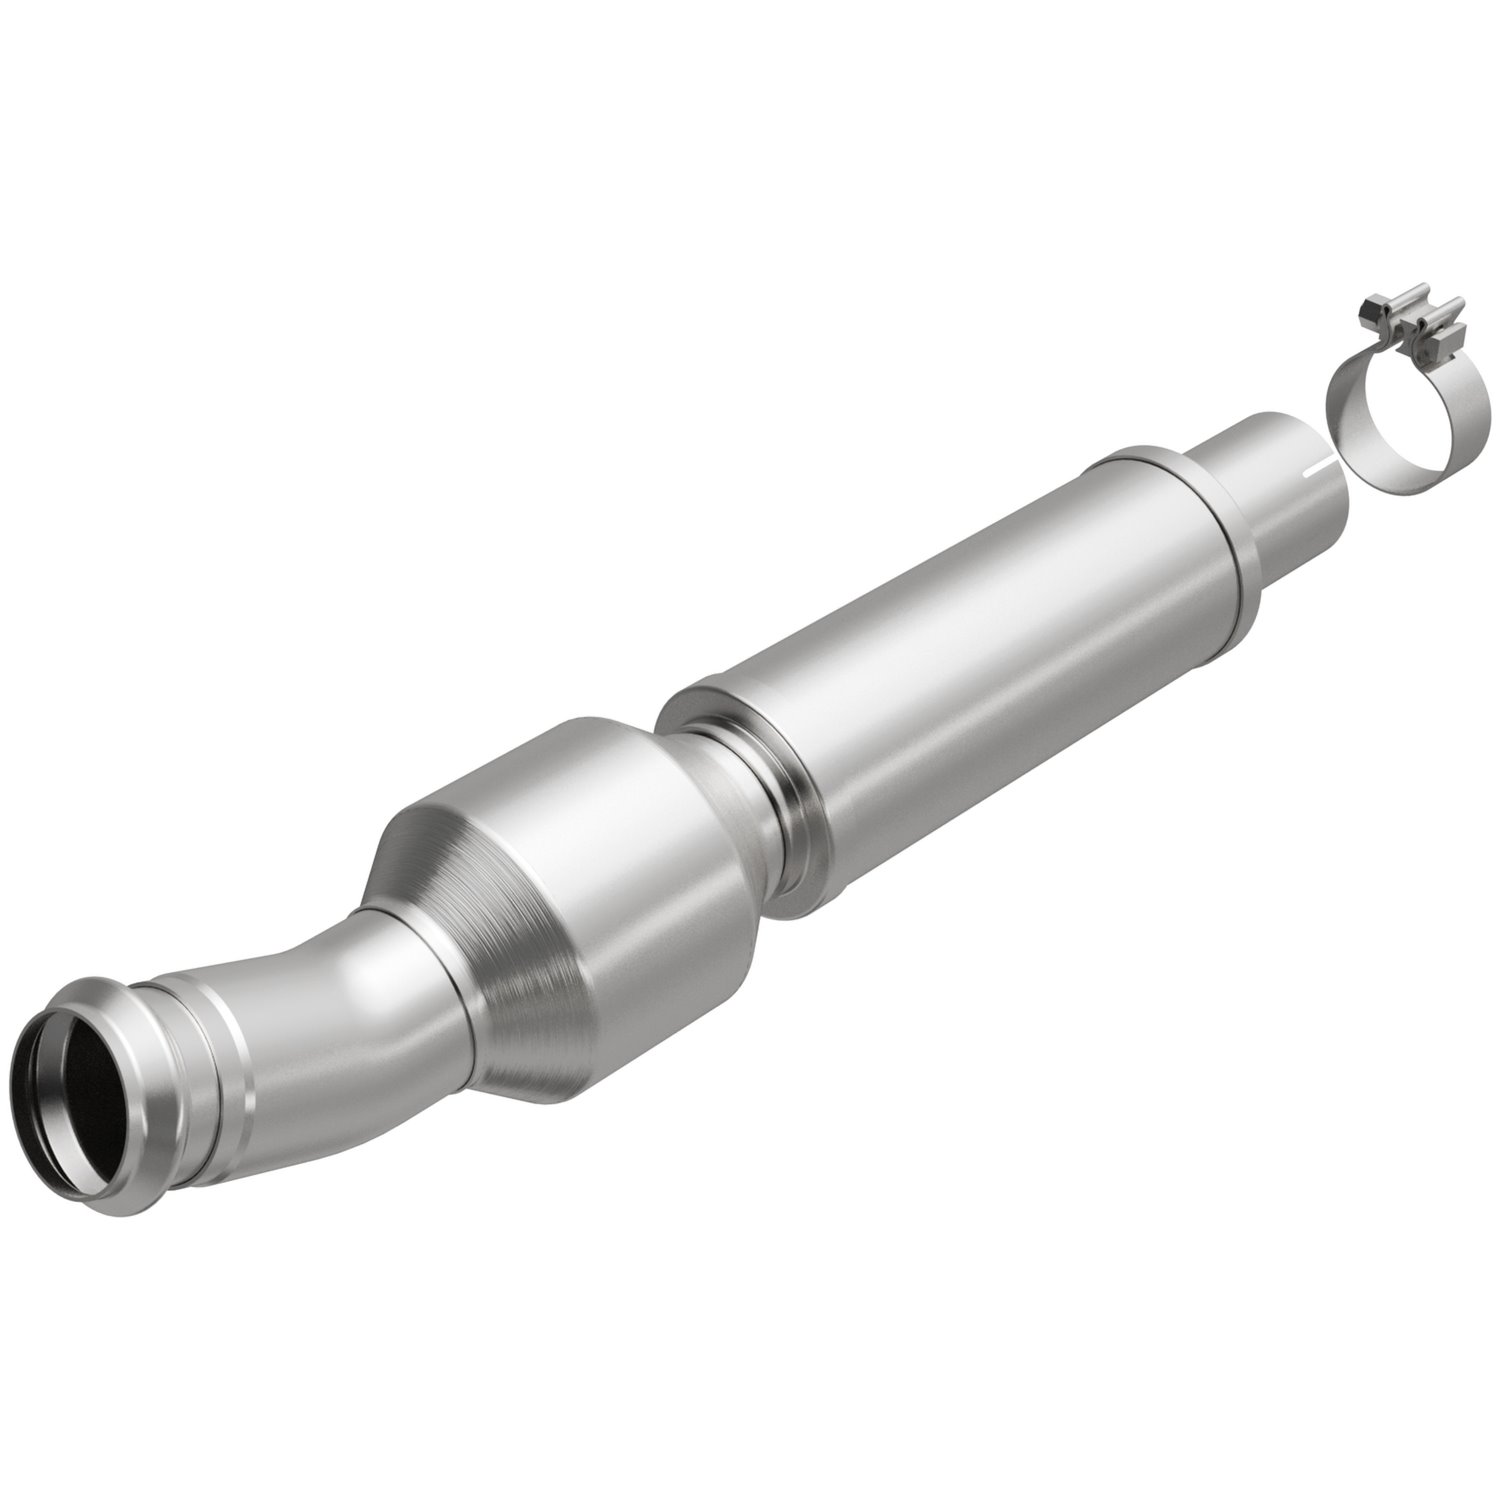 OEM Grade Federal / EPA Compliant Direct-Fit Catalytic Converter 21-737